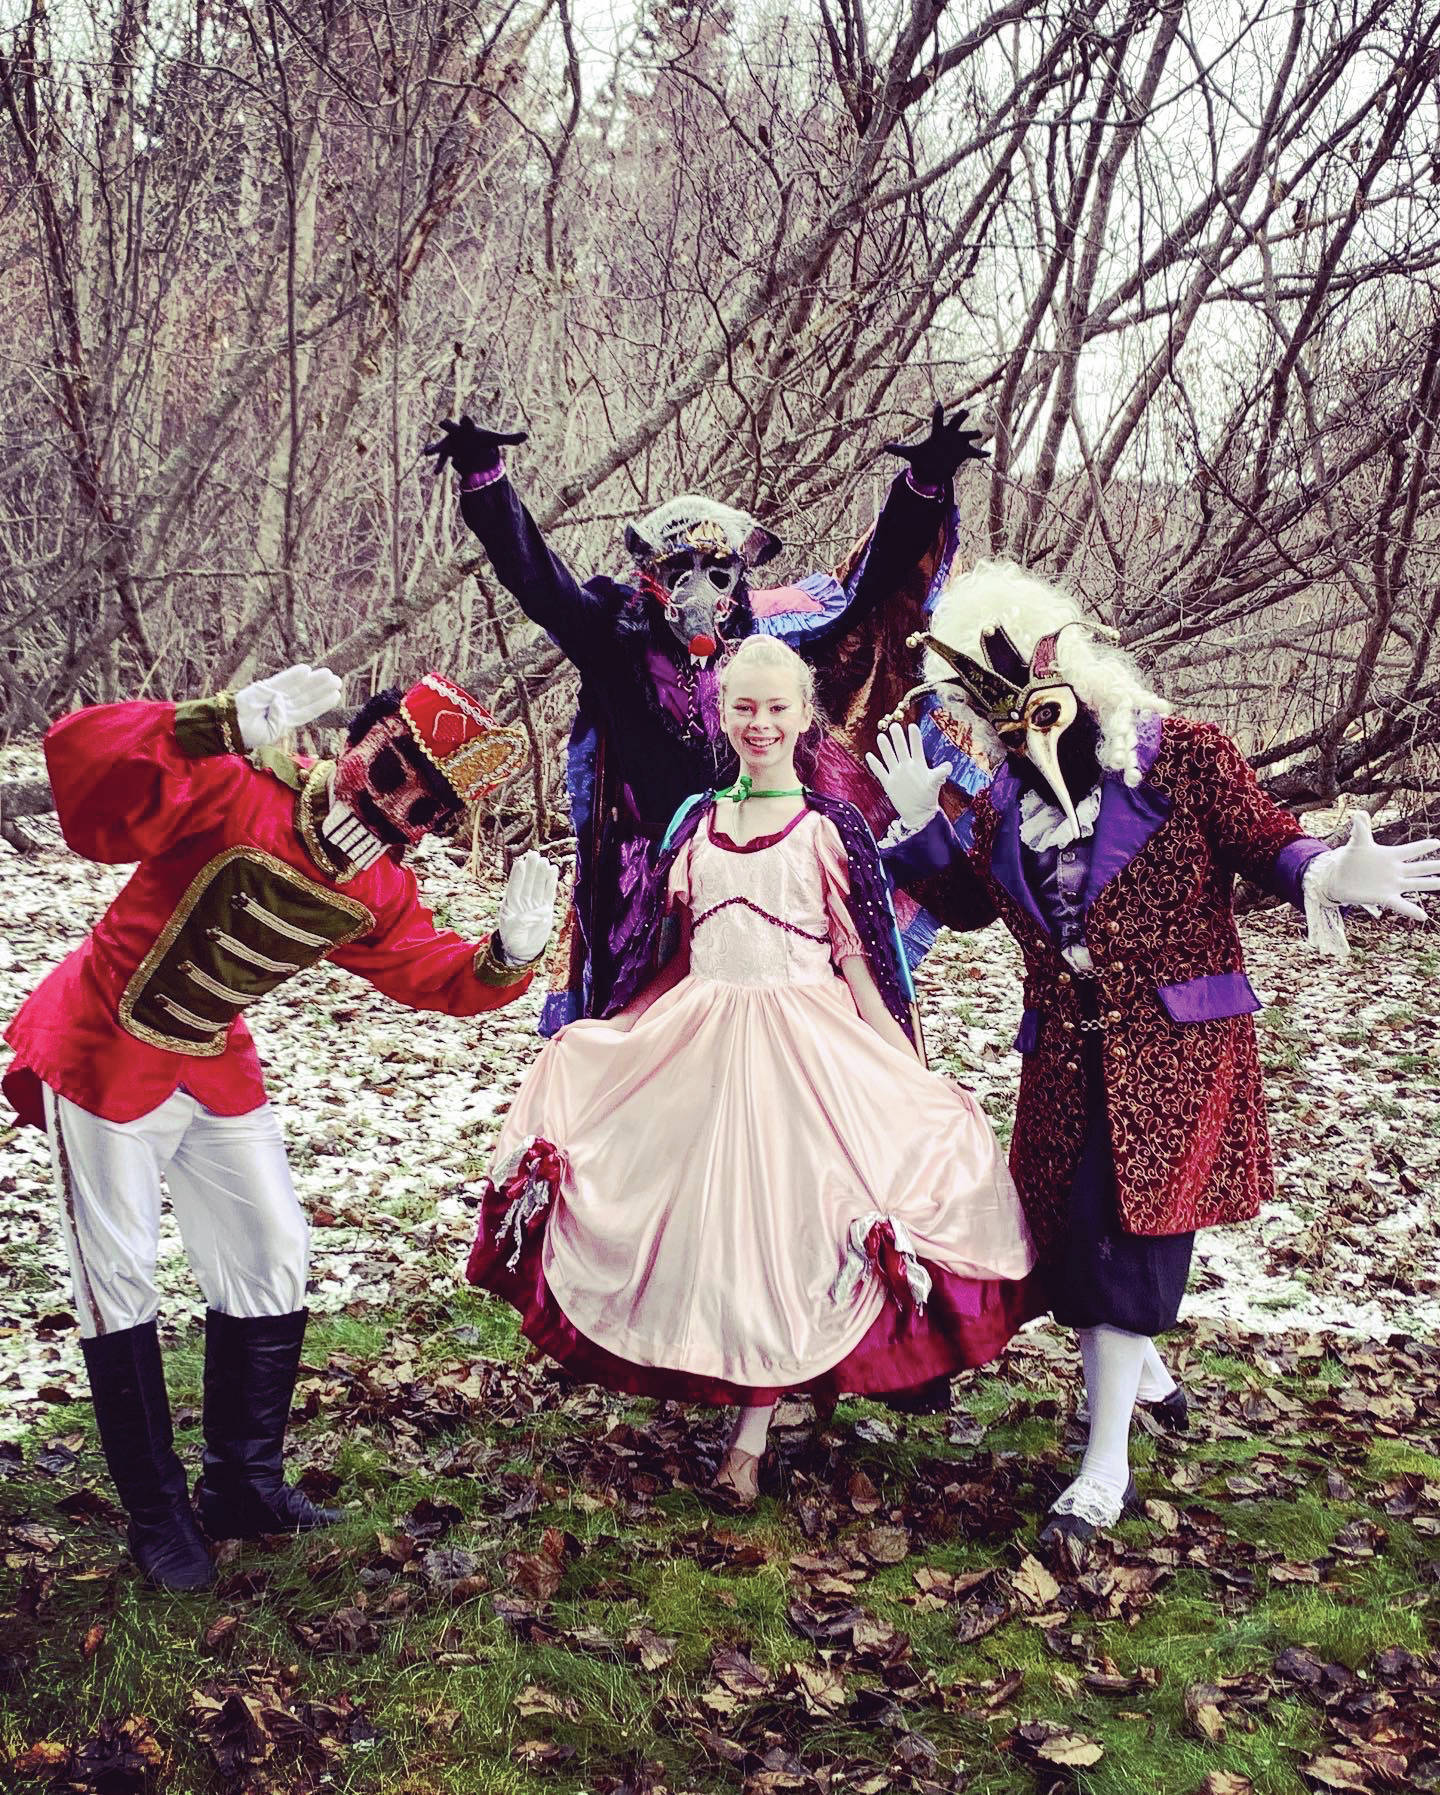 From left to right, Bryson Brewer-Dell as the Nutcracker, Liam James as the Rat King, Swift Blackstock as Clara and Aaron Walbrecher as Drosselmeyer pose for a photo on Nov. 30, 2020, for the “Petite Nutcracker Ballet” at the Carl Wynn Nature Center in Homer, Alaska. (Photo courtesy Homer Nutcracker Production)